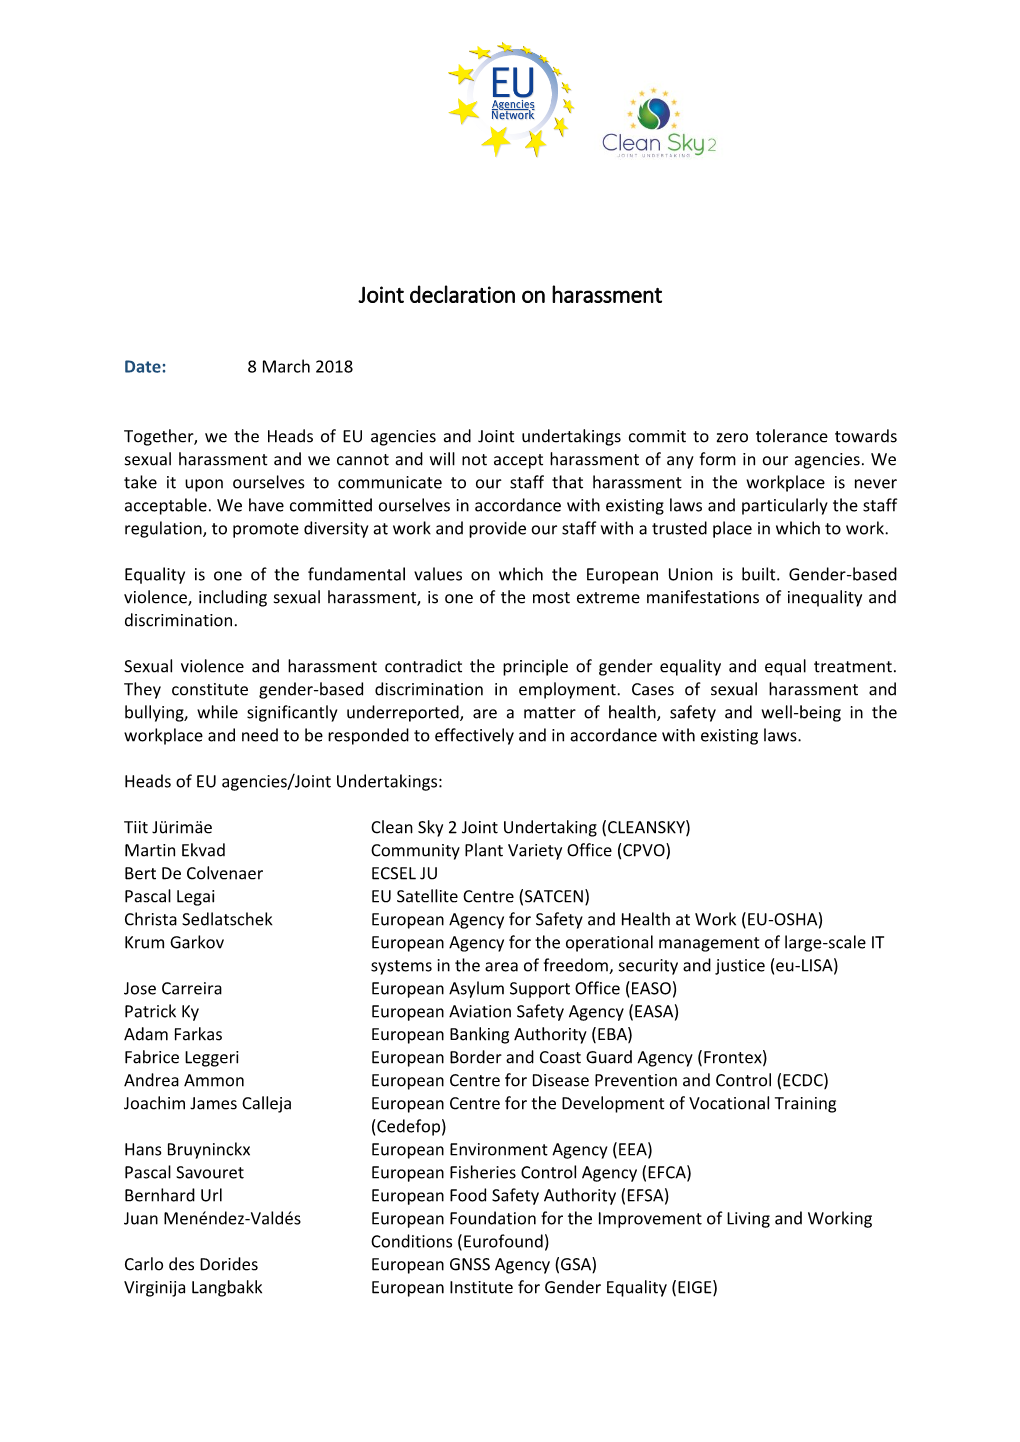 To Read the Joint Declaration on Harassment